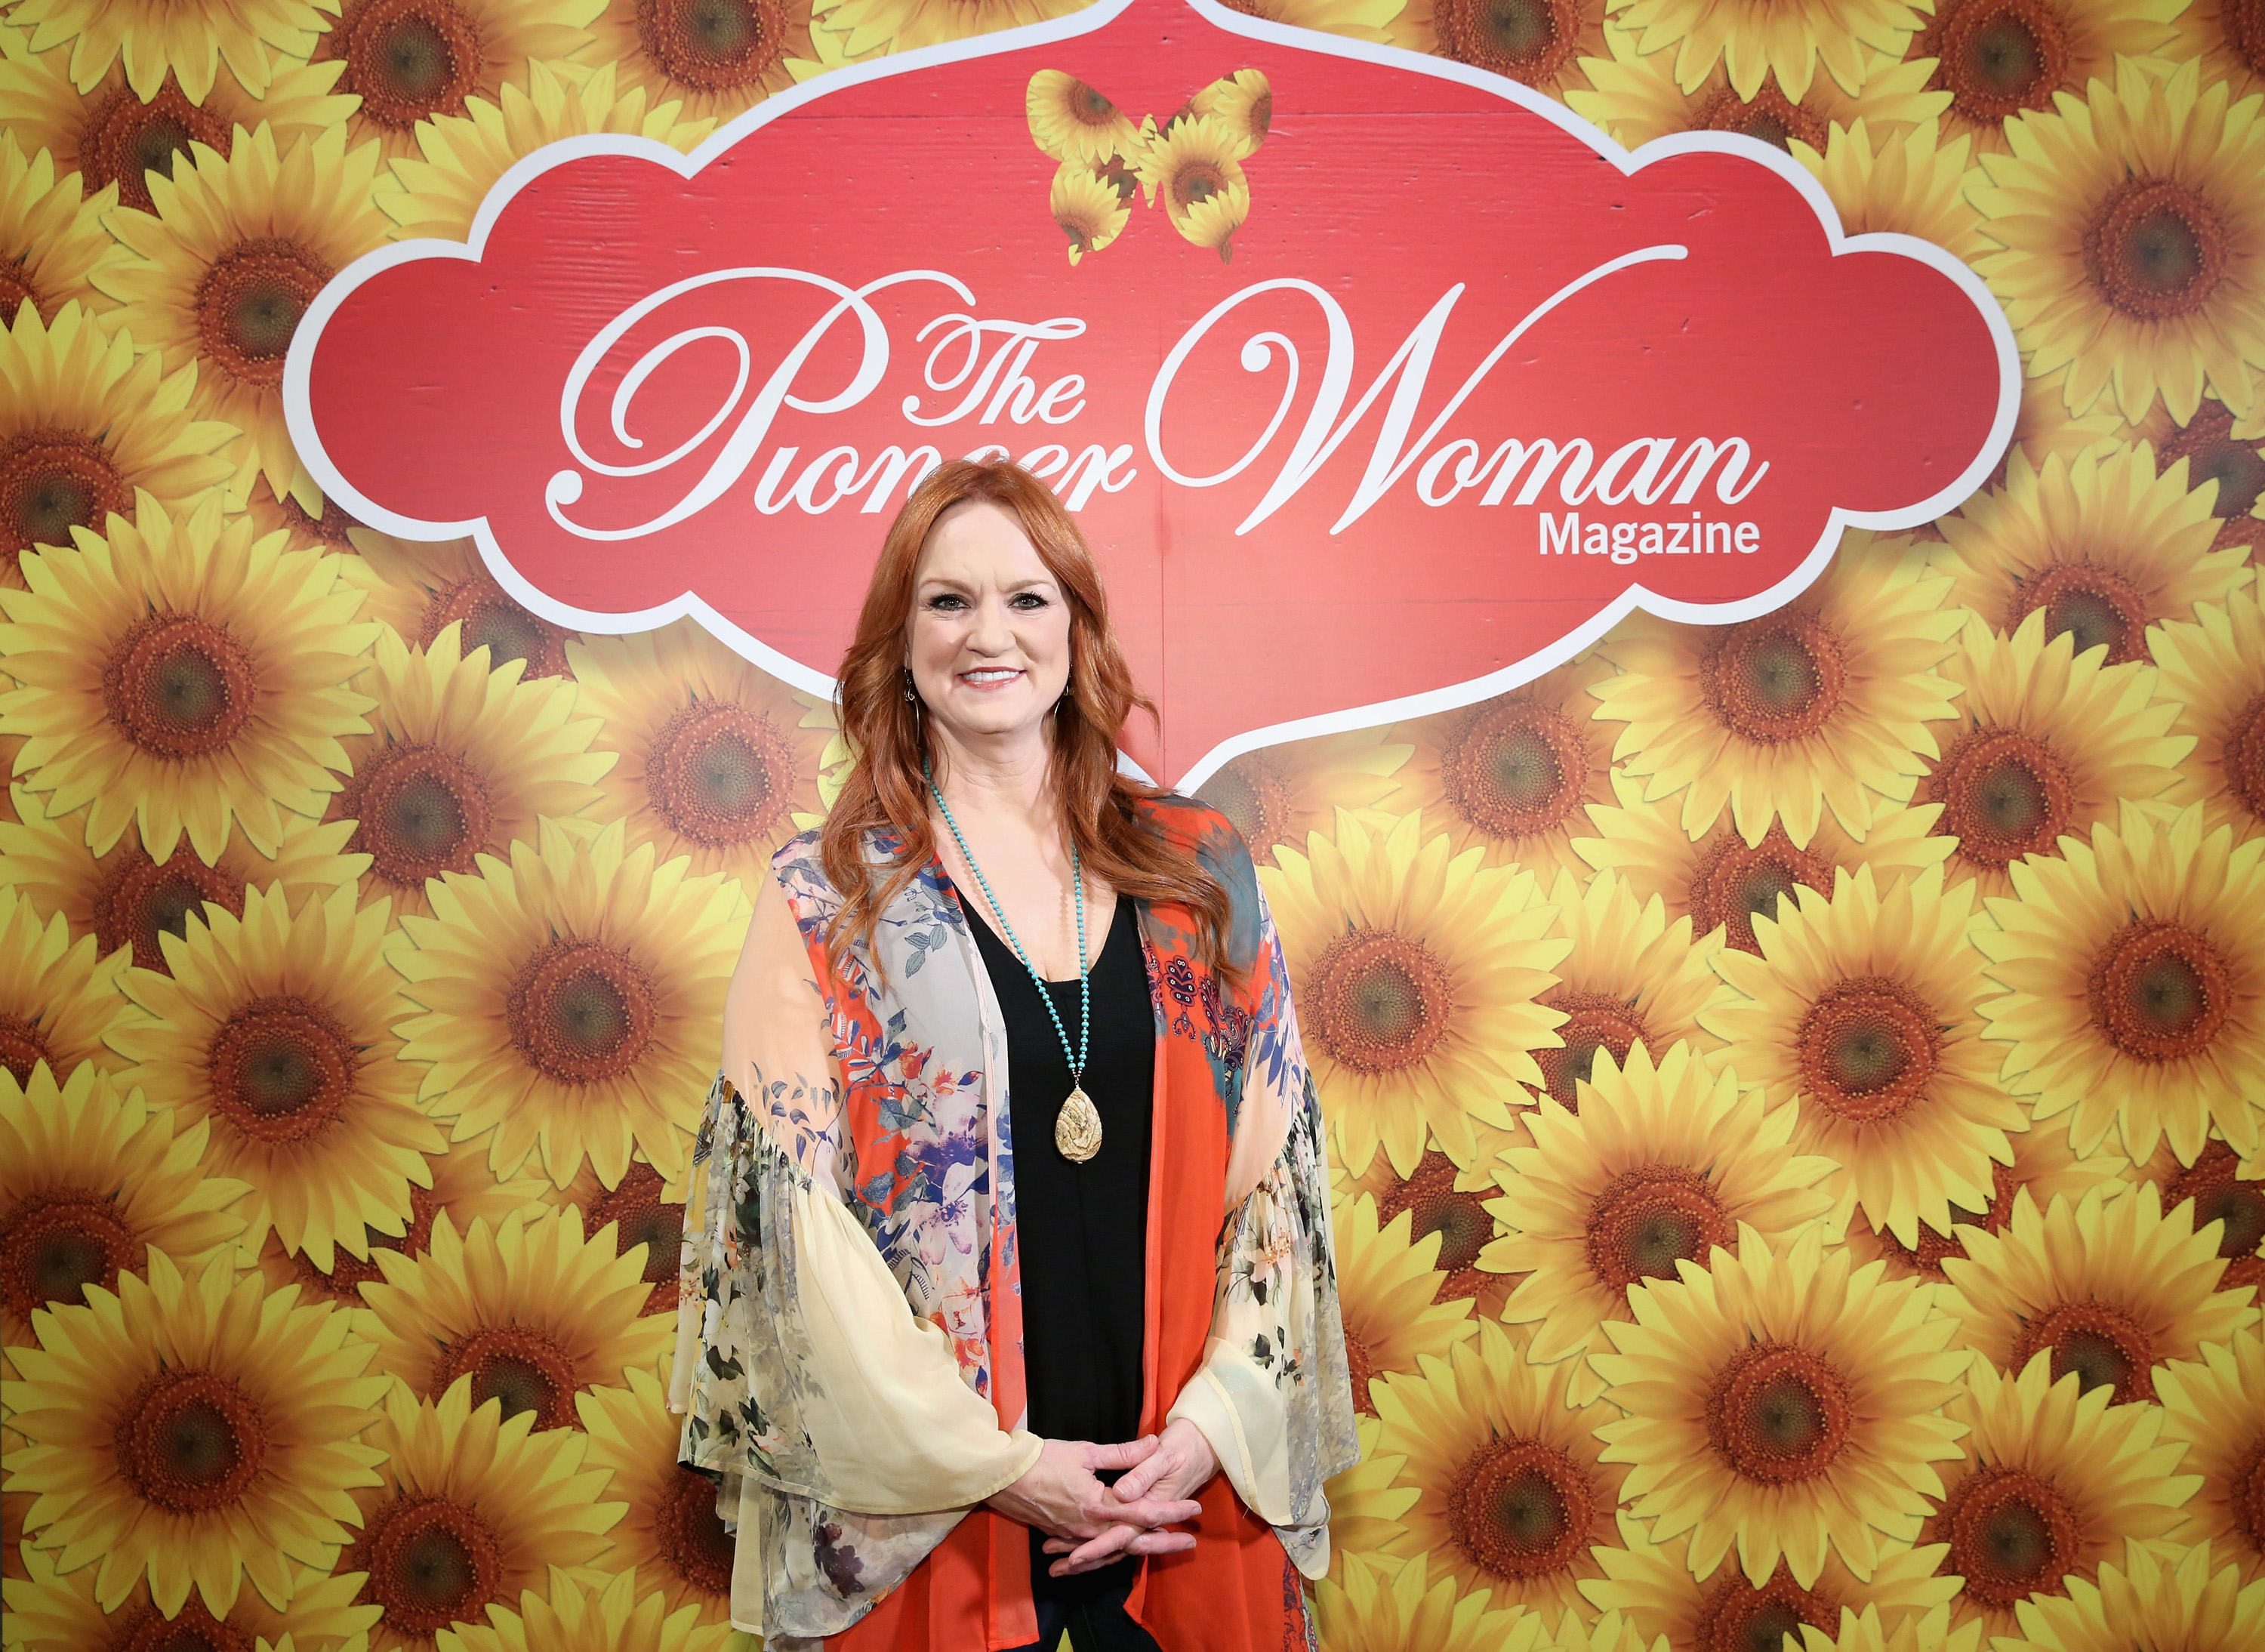 The Pioneer Woman star Ree Drummond | Monica Schipper/Getty Images for The Pioneer Woman Magazine